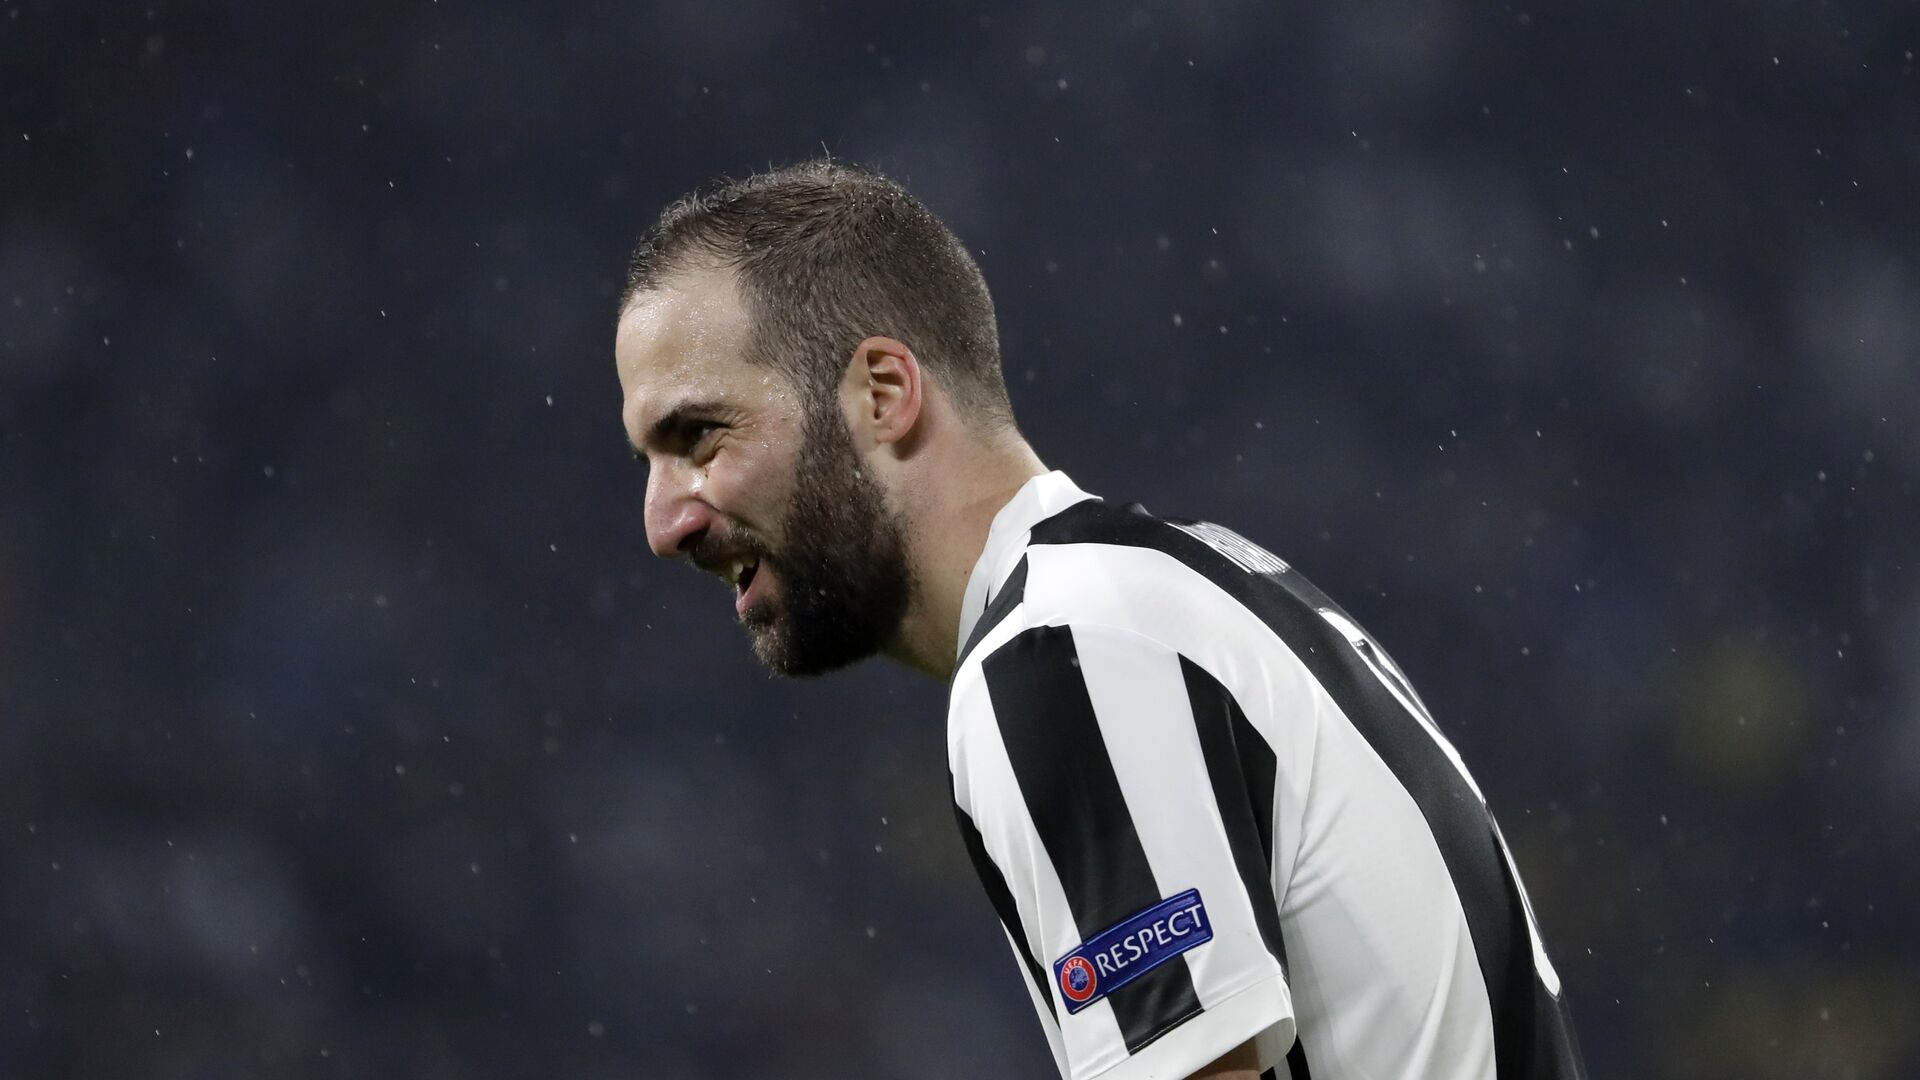 Juventus' Gonzalo Higuain reacts during the Champions League, round of 8, first-leg soccer match between Juventus and Real Madrid at the Allianz stadium in Turin, Italy, Tuesday, April 3, 2018 - اسپوتنیک افغانستان  , 1920, 02.03.2022